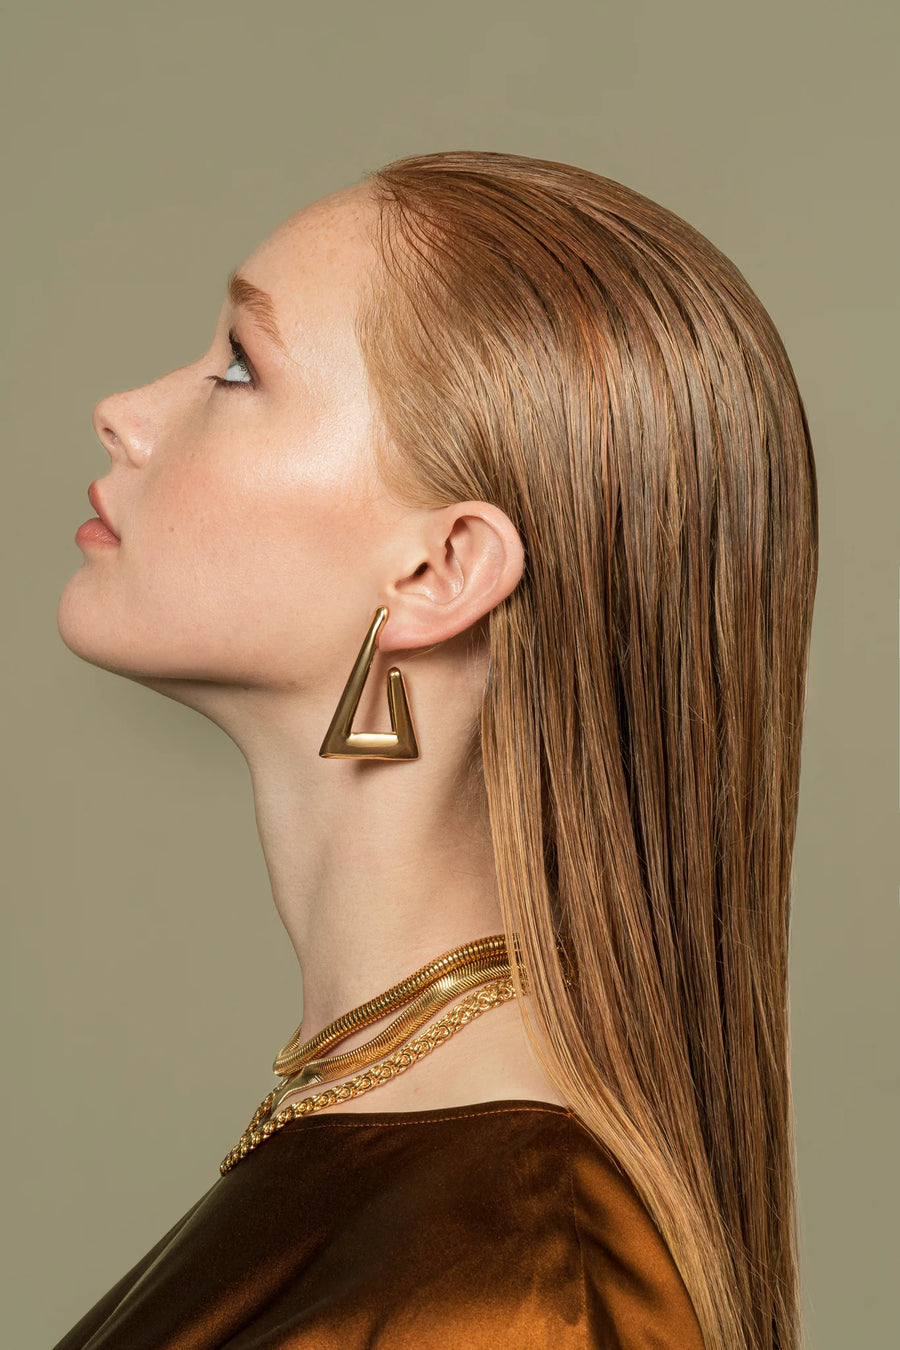 XL Sculptural Triangle Earrings In 18K Yellow Gold